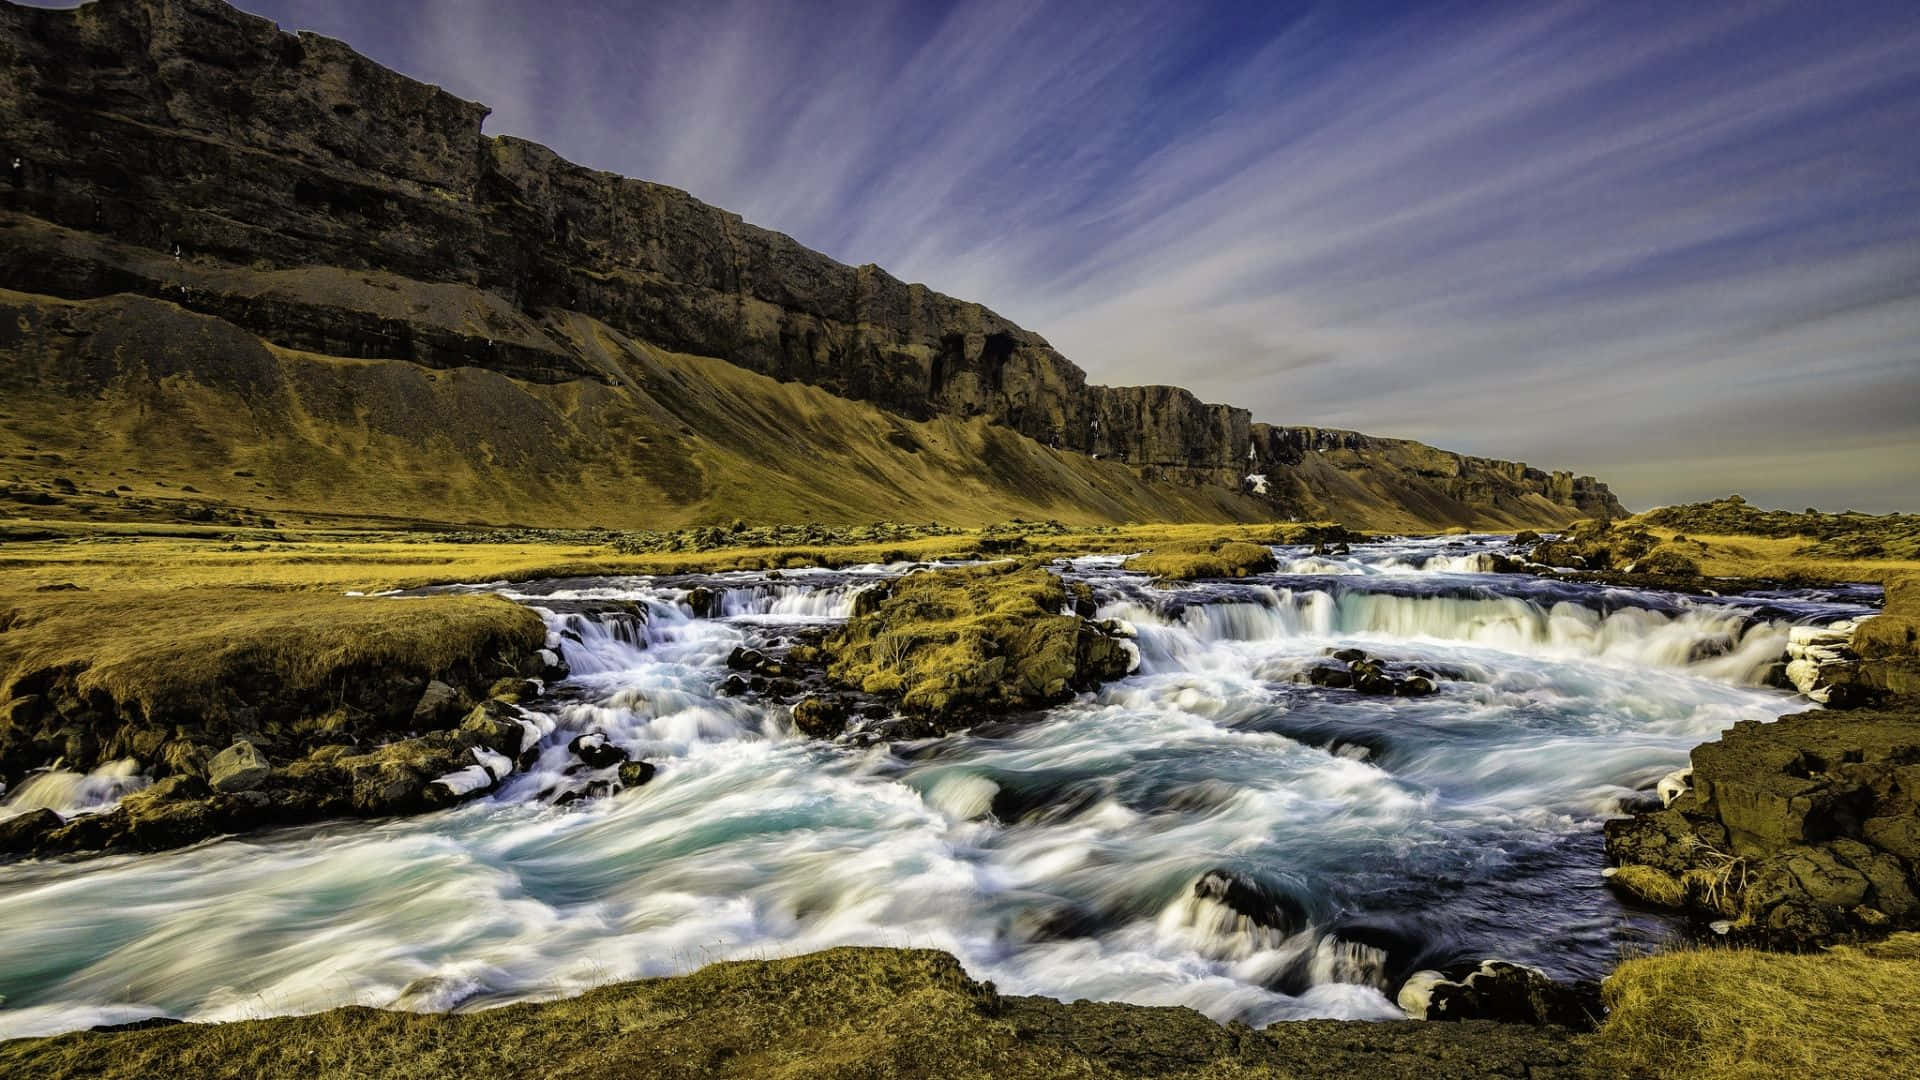 "The Tranquility of the Icelandic Landscape" Wallpaper